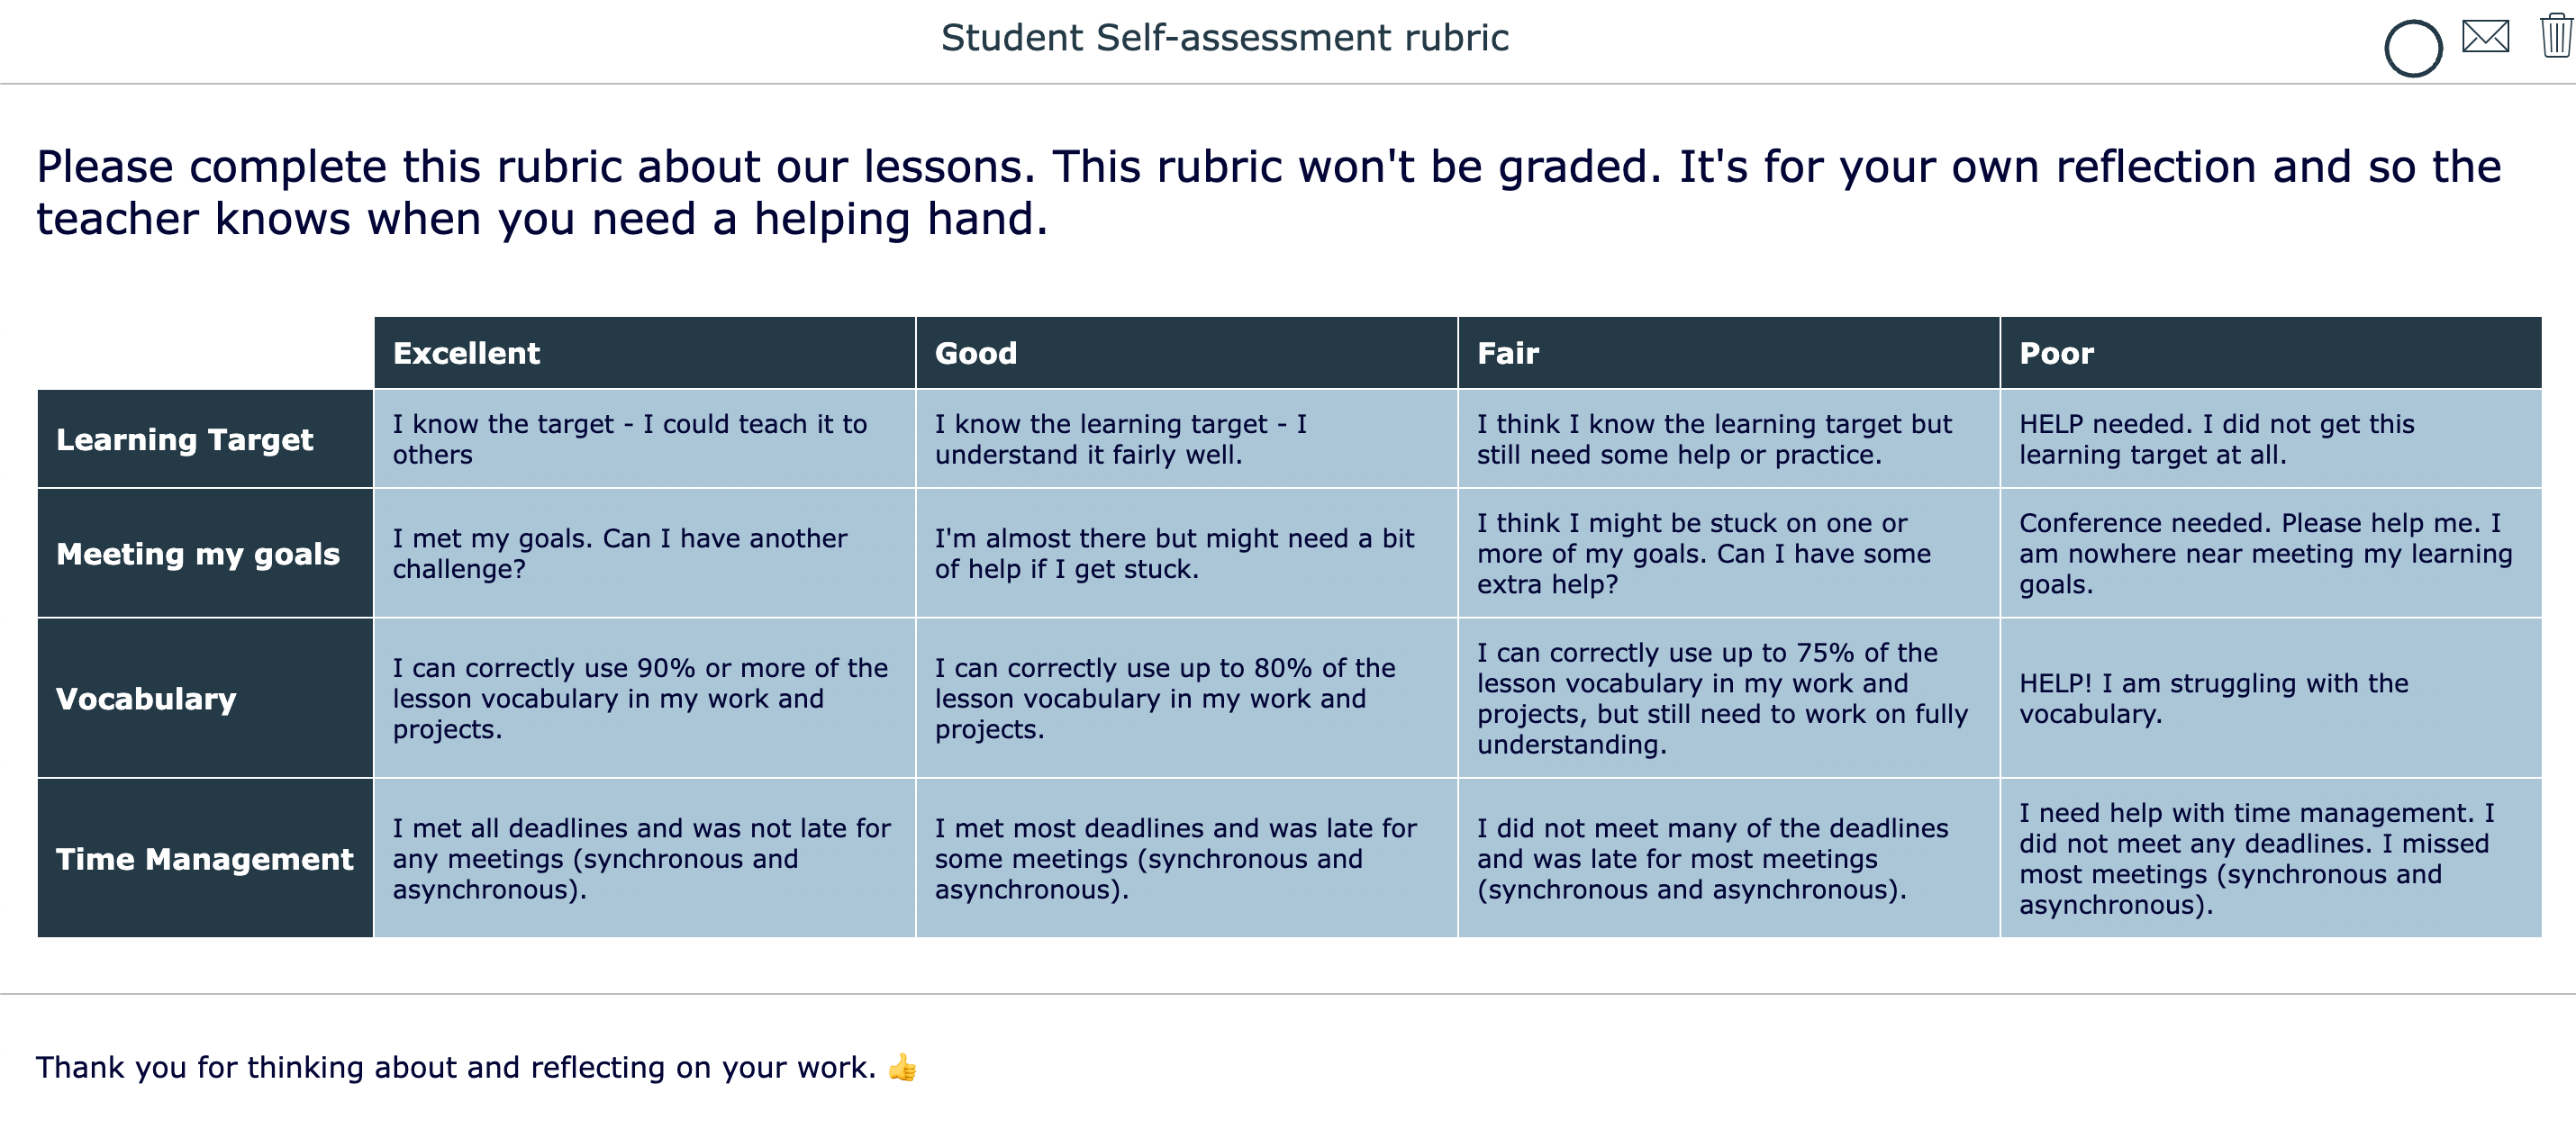 Self-assessment rubric for students